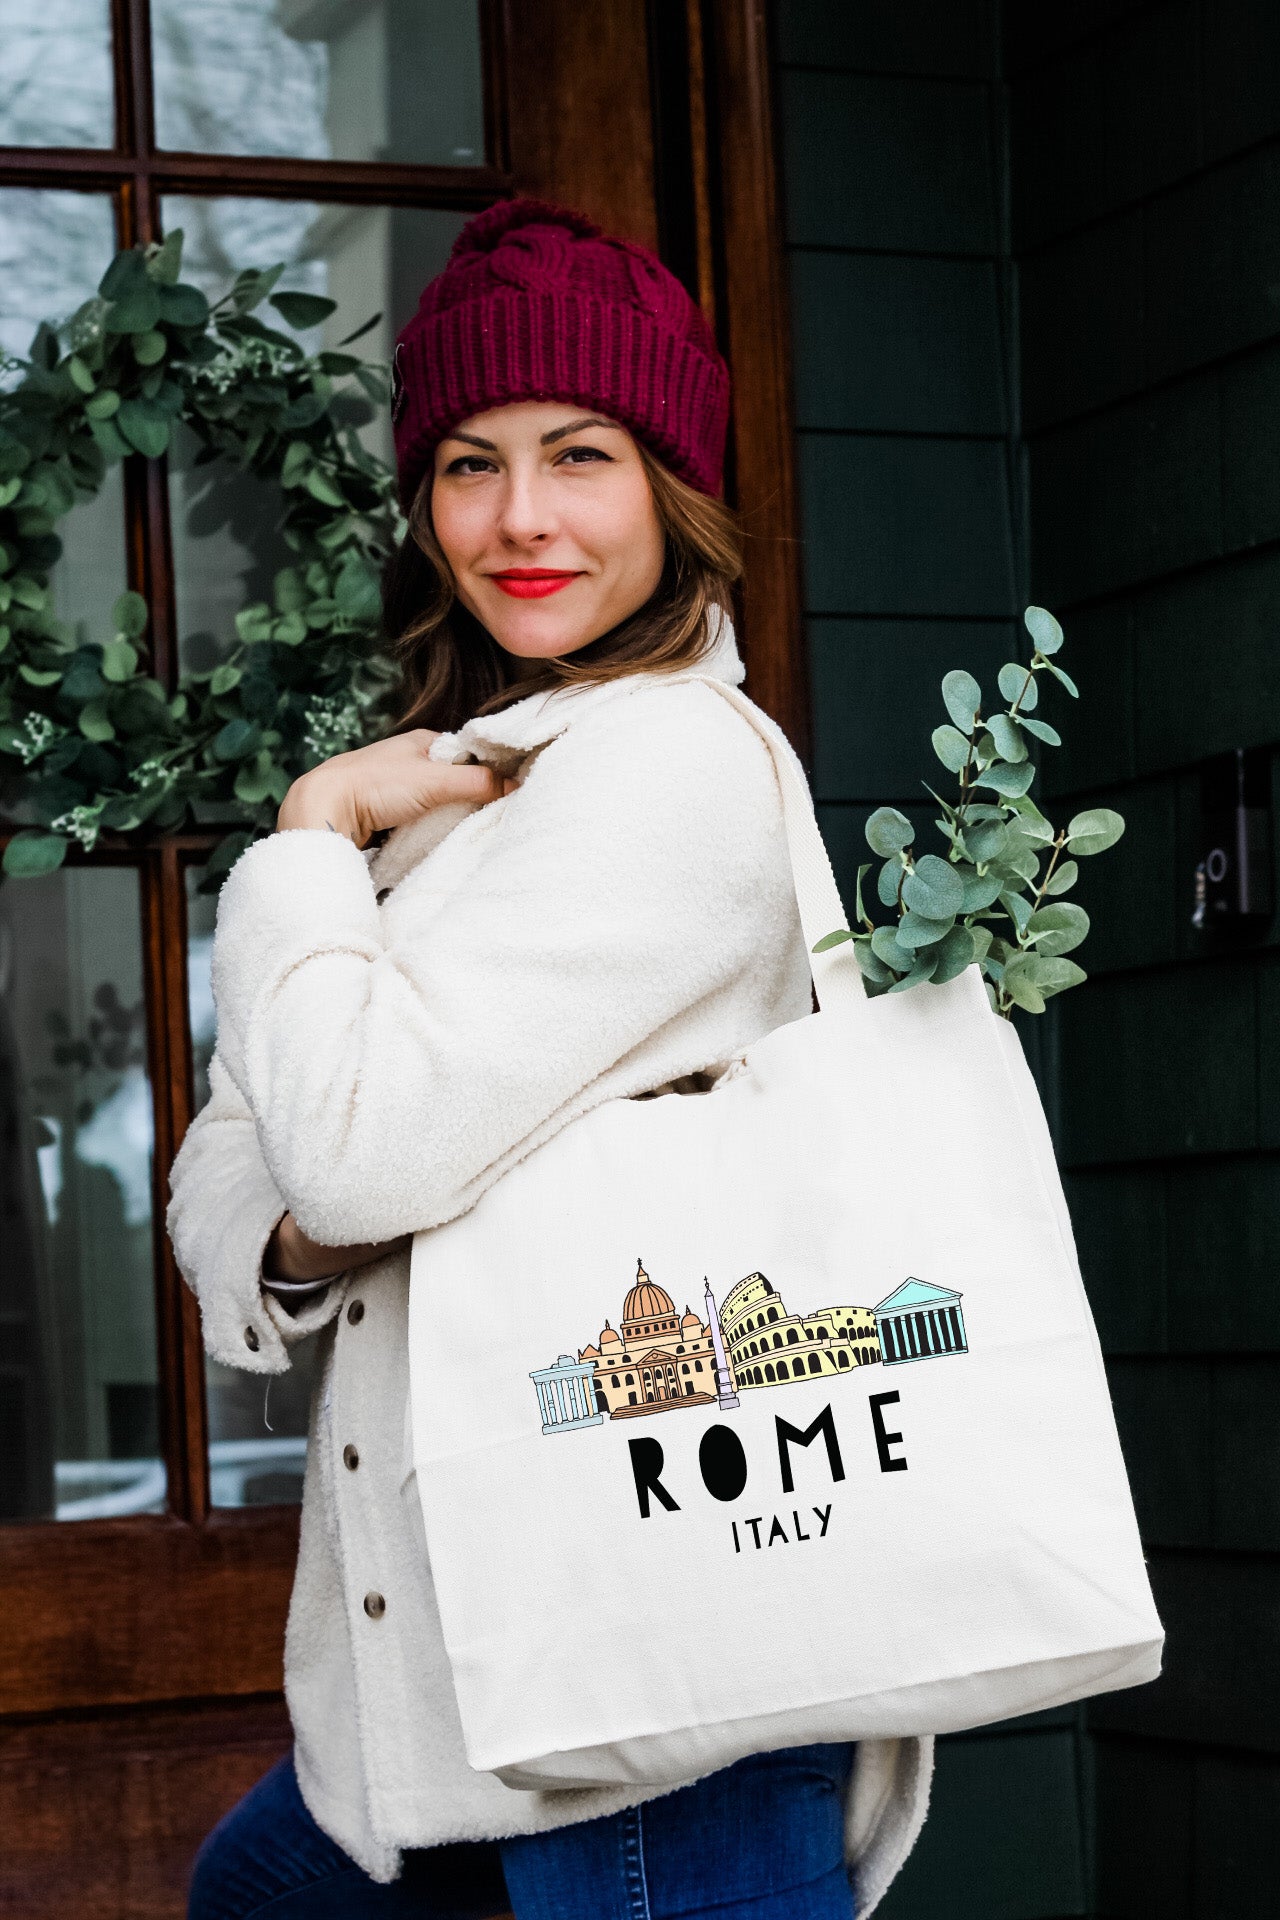 a woman carrying a white bag with a picture of a building on it